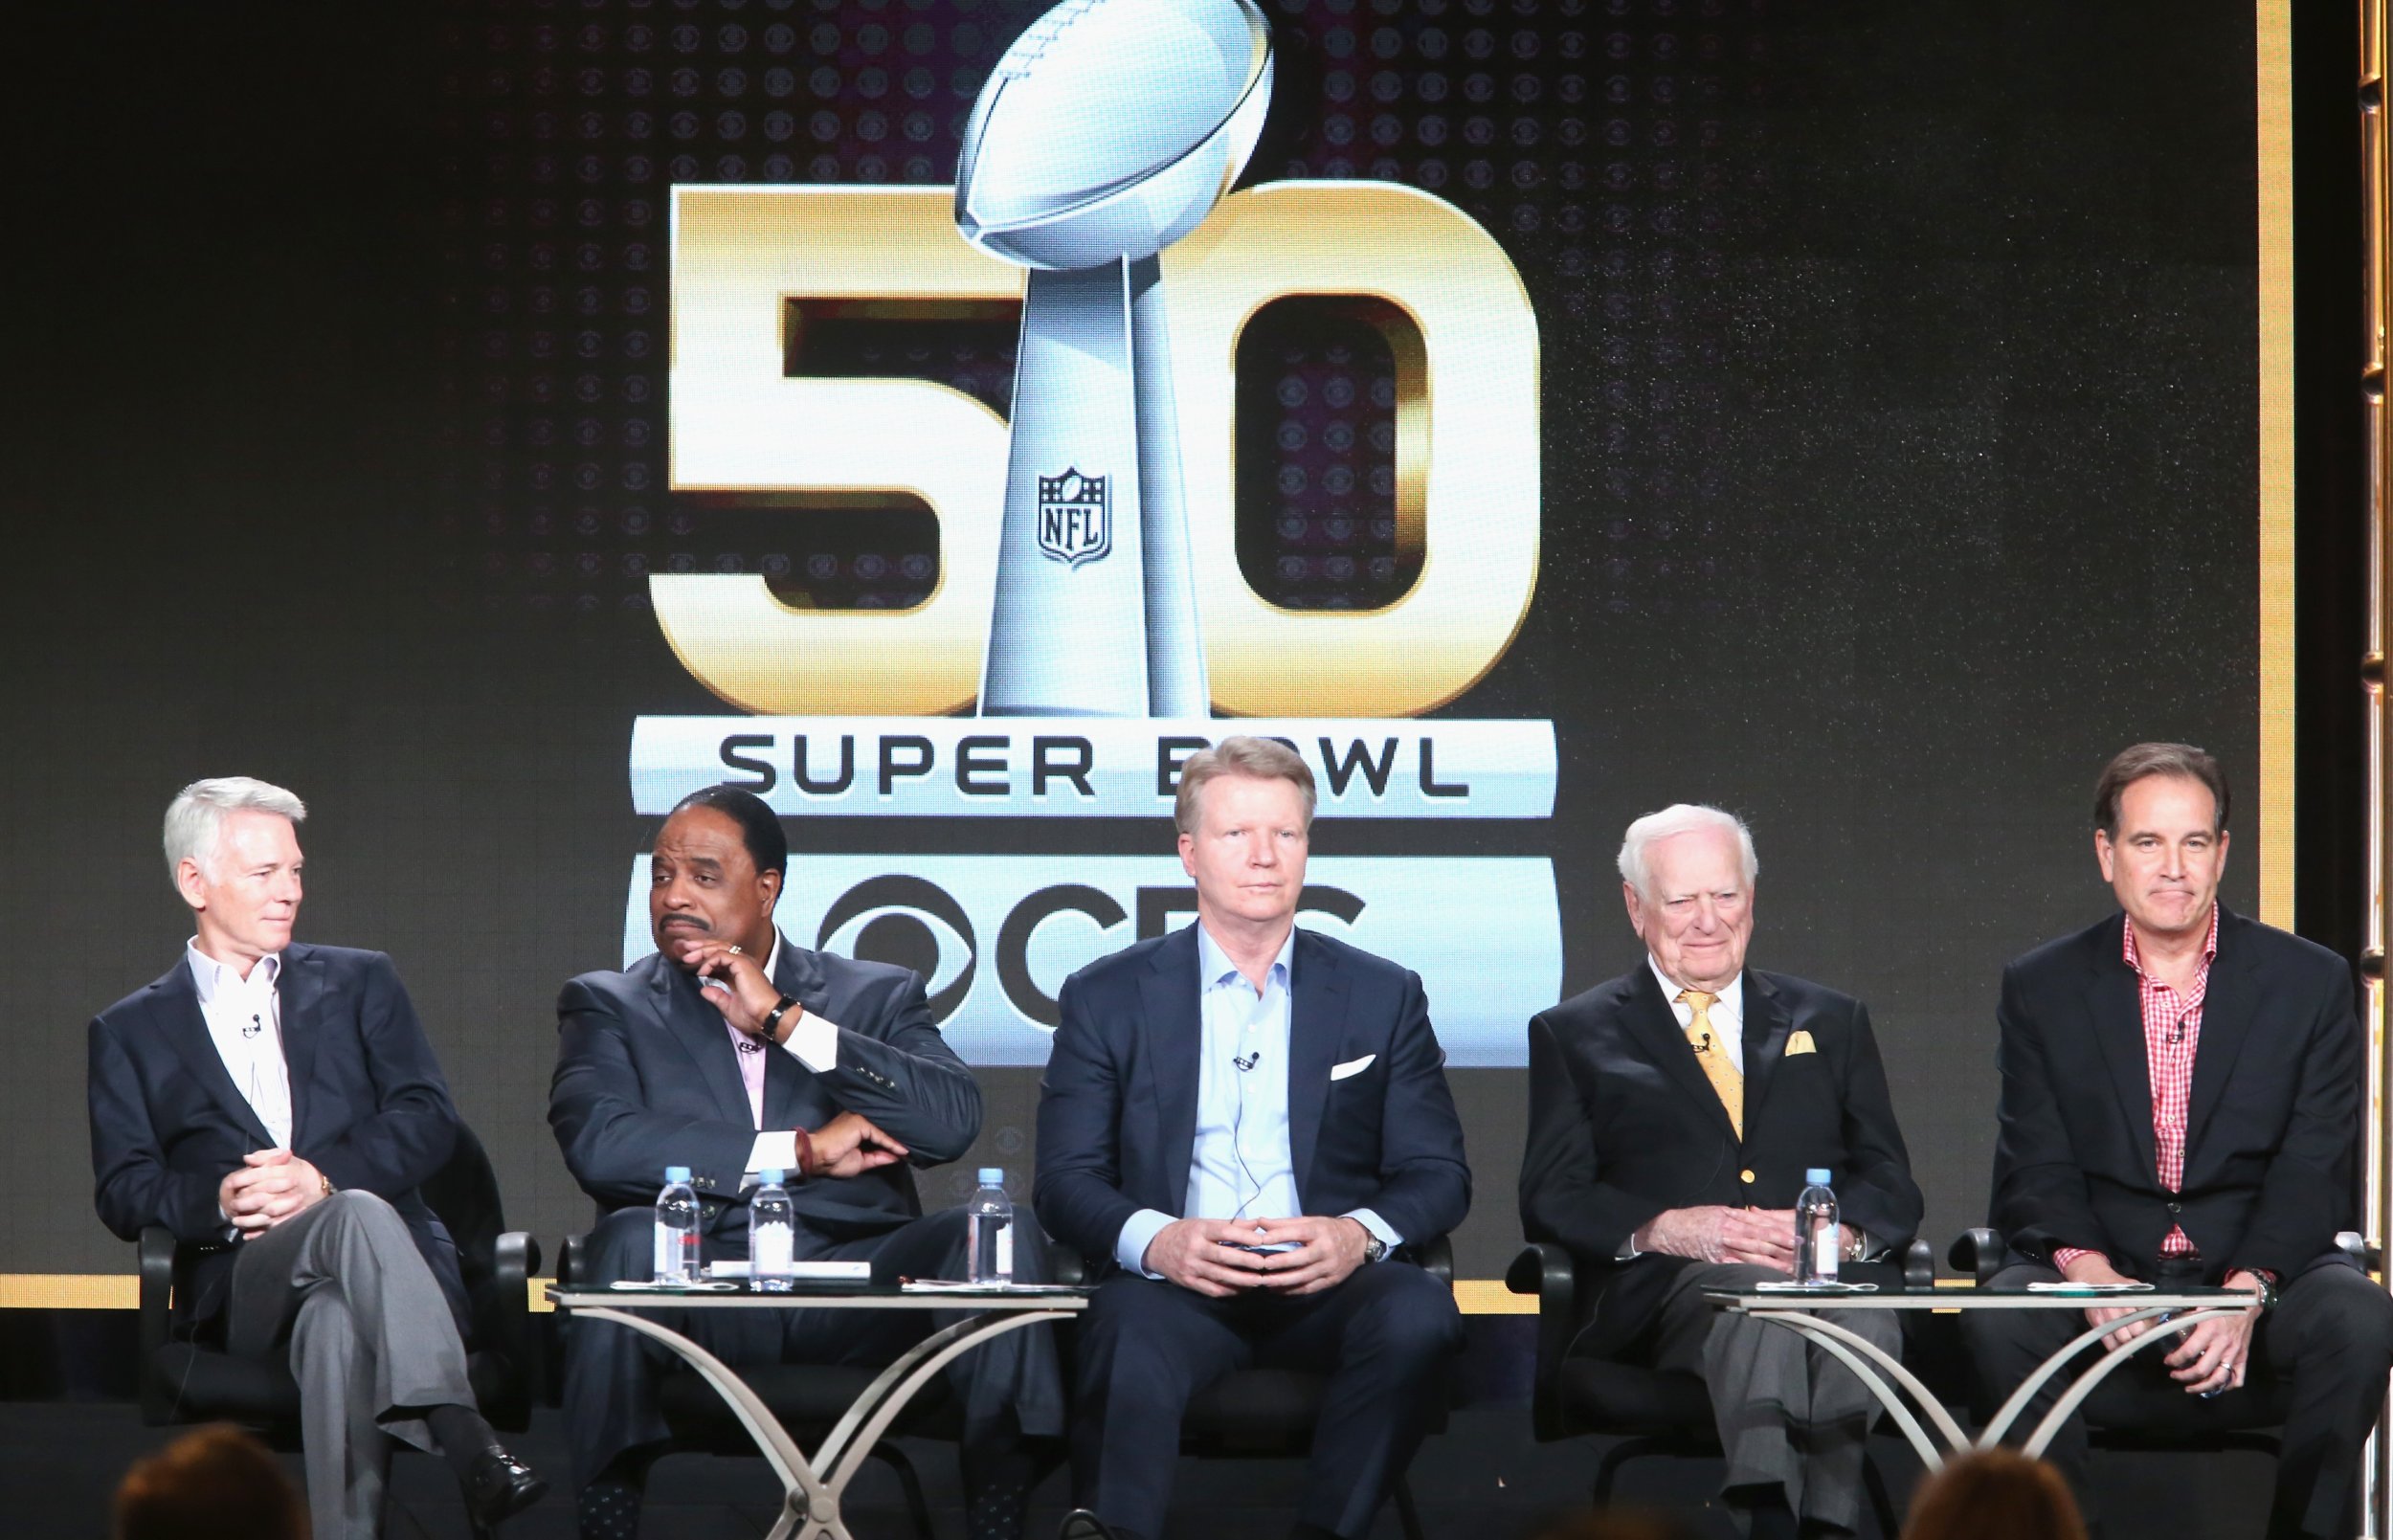 What Time Does The Super Bowl Start? Actual Kickoff Time, TV Pregame